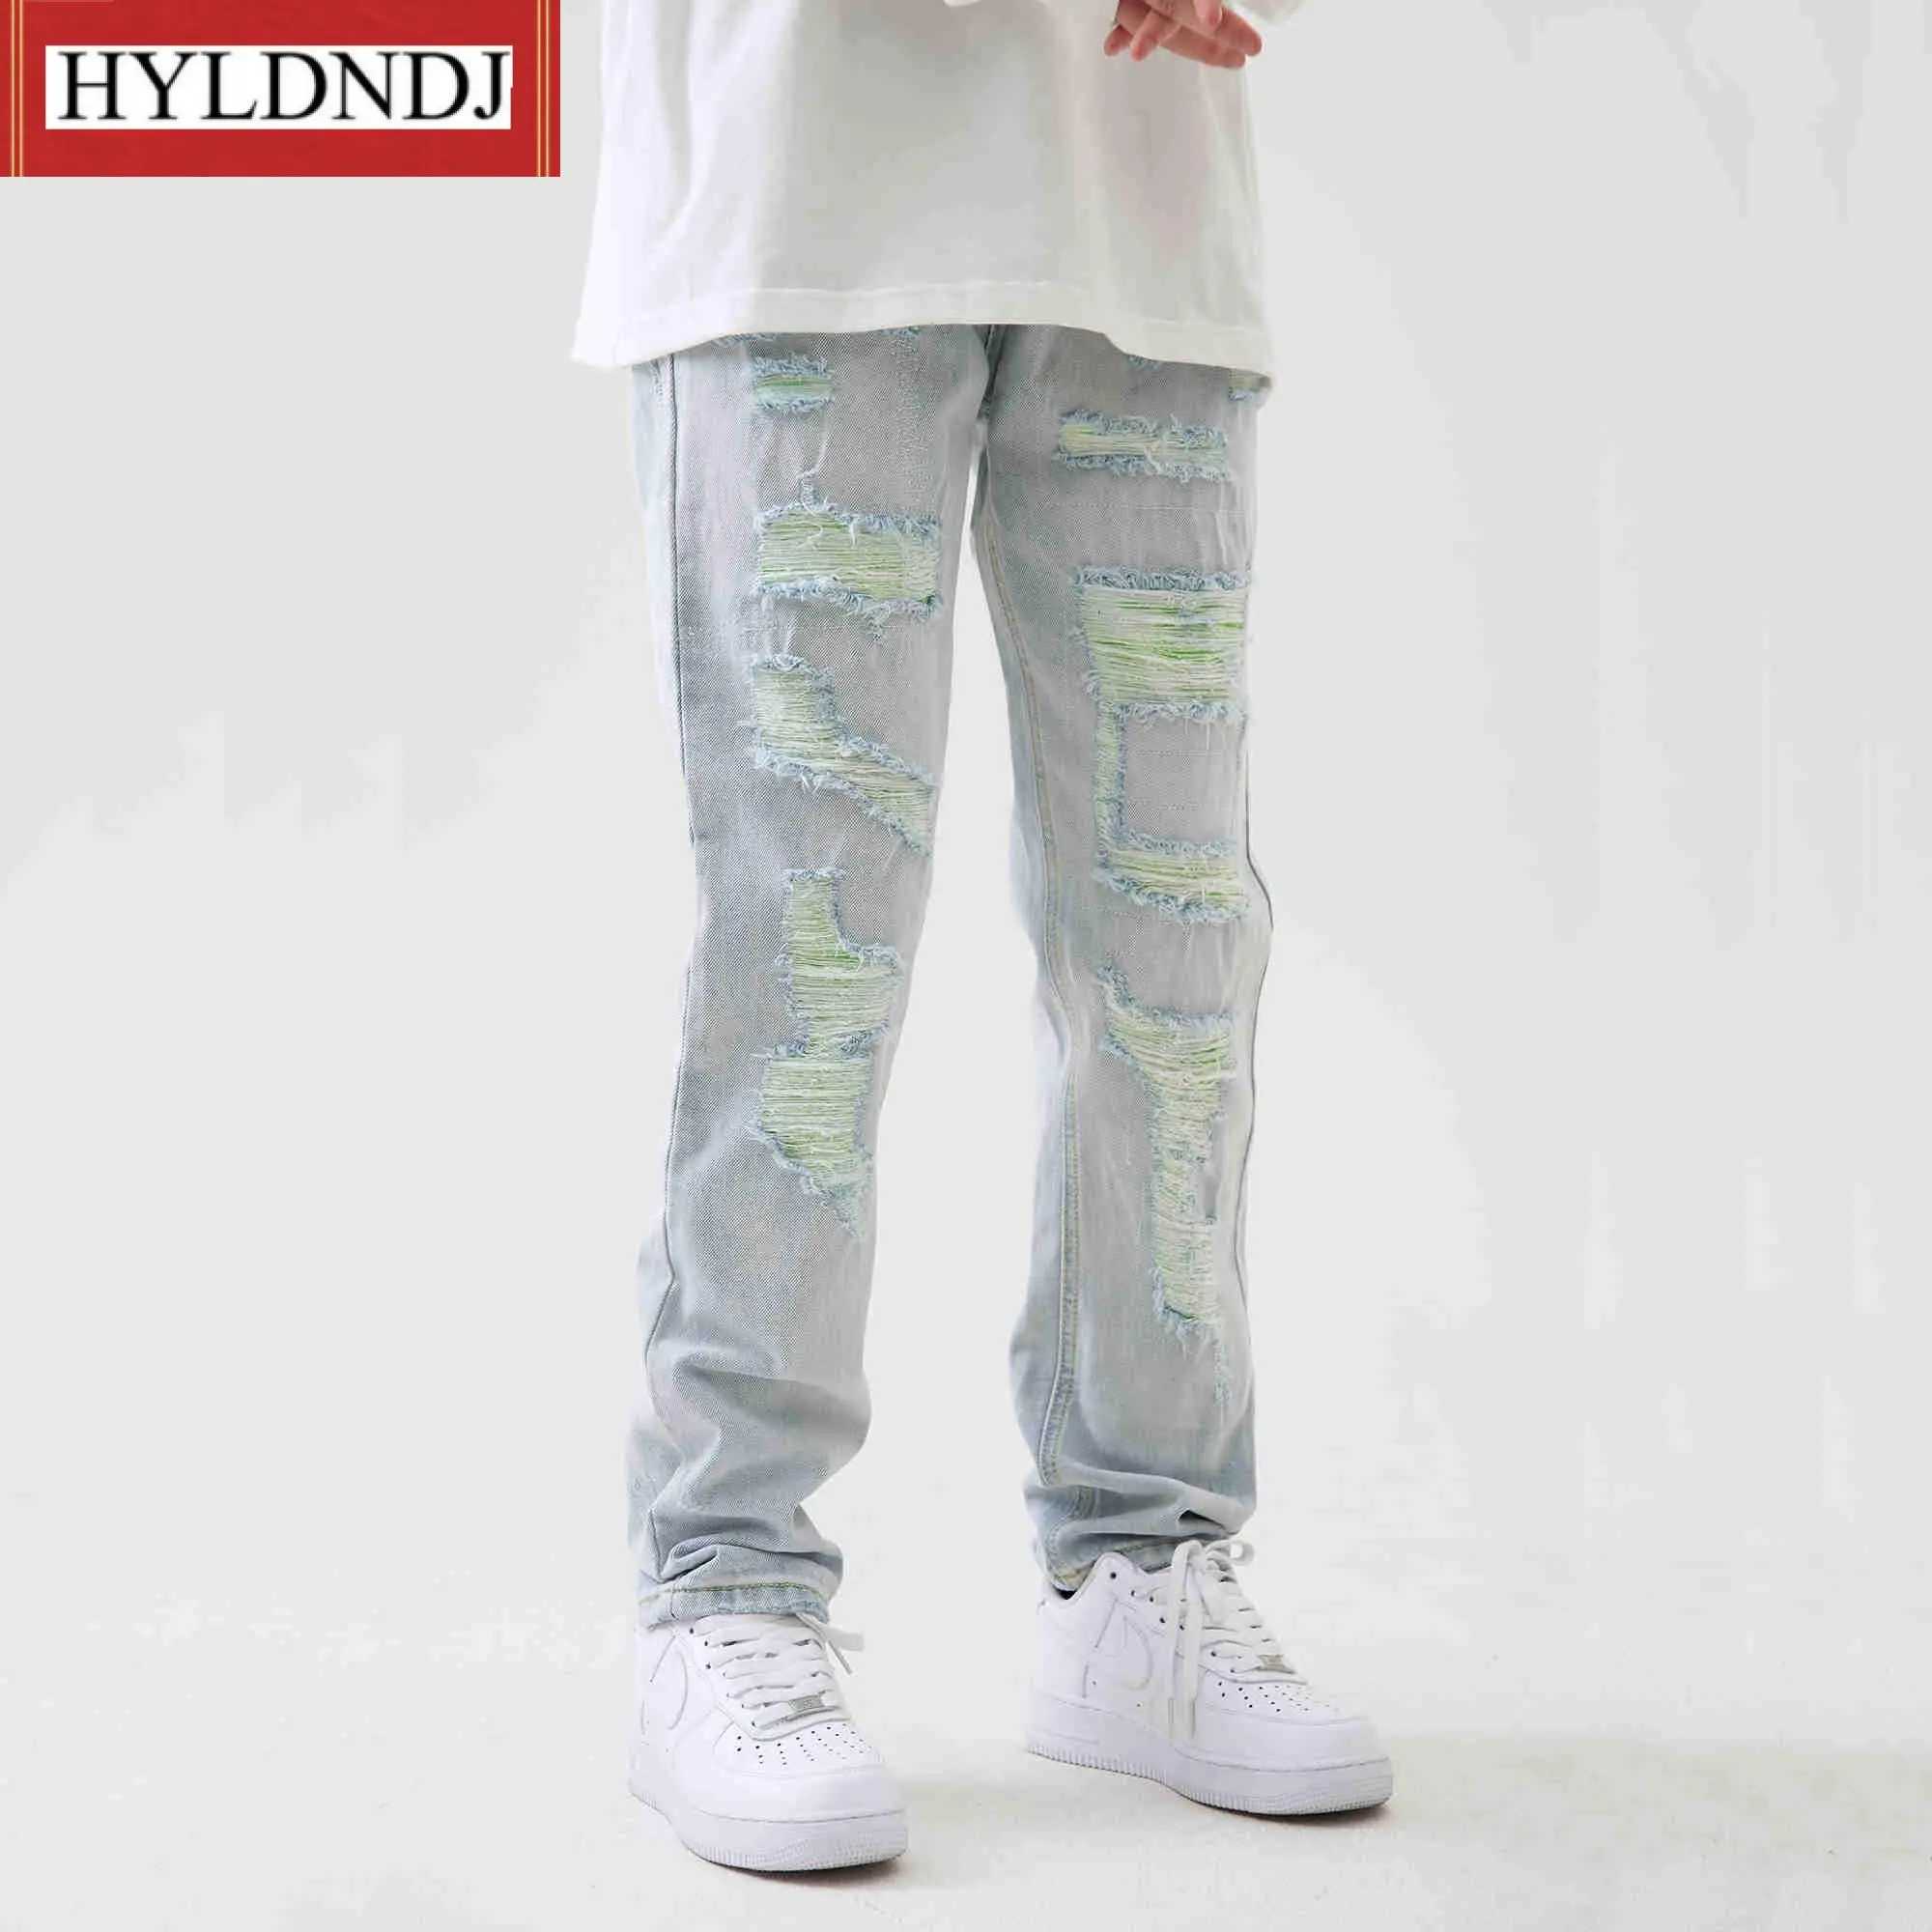 Men's New Fashion Handsome Fried Street Slim Pants European and American Fashion Brand Street Hole Light Color Jeans